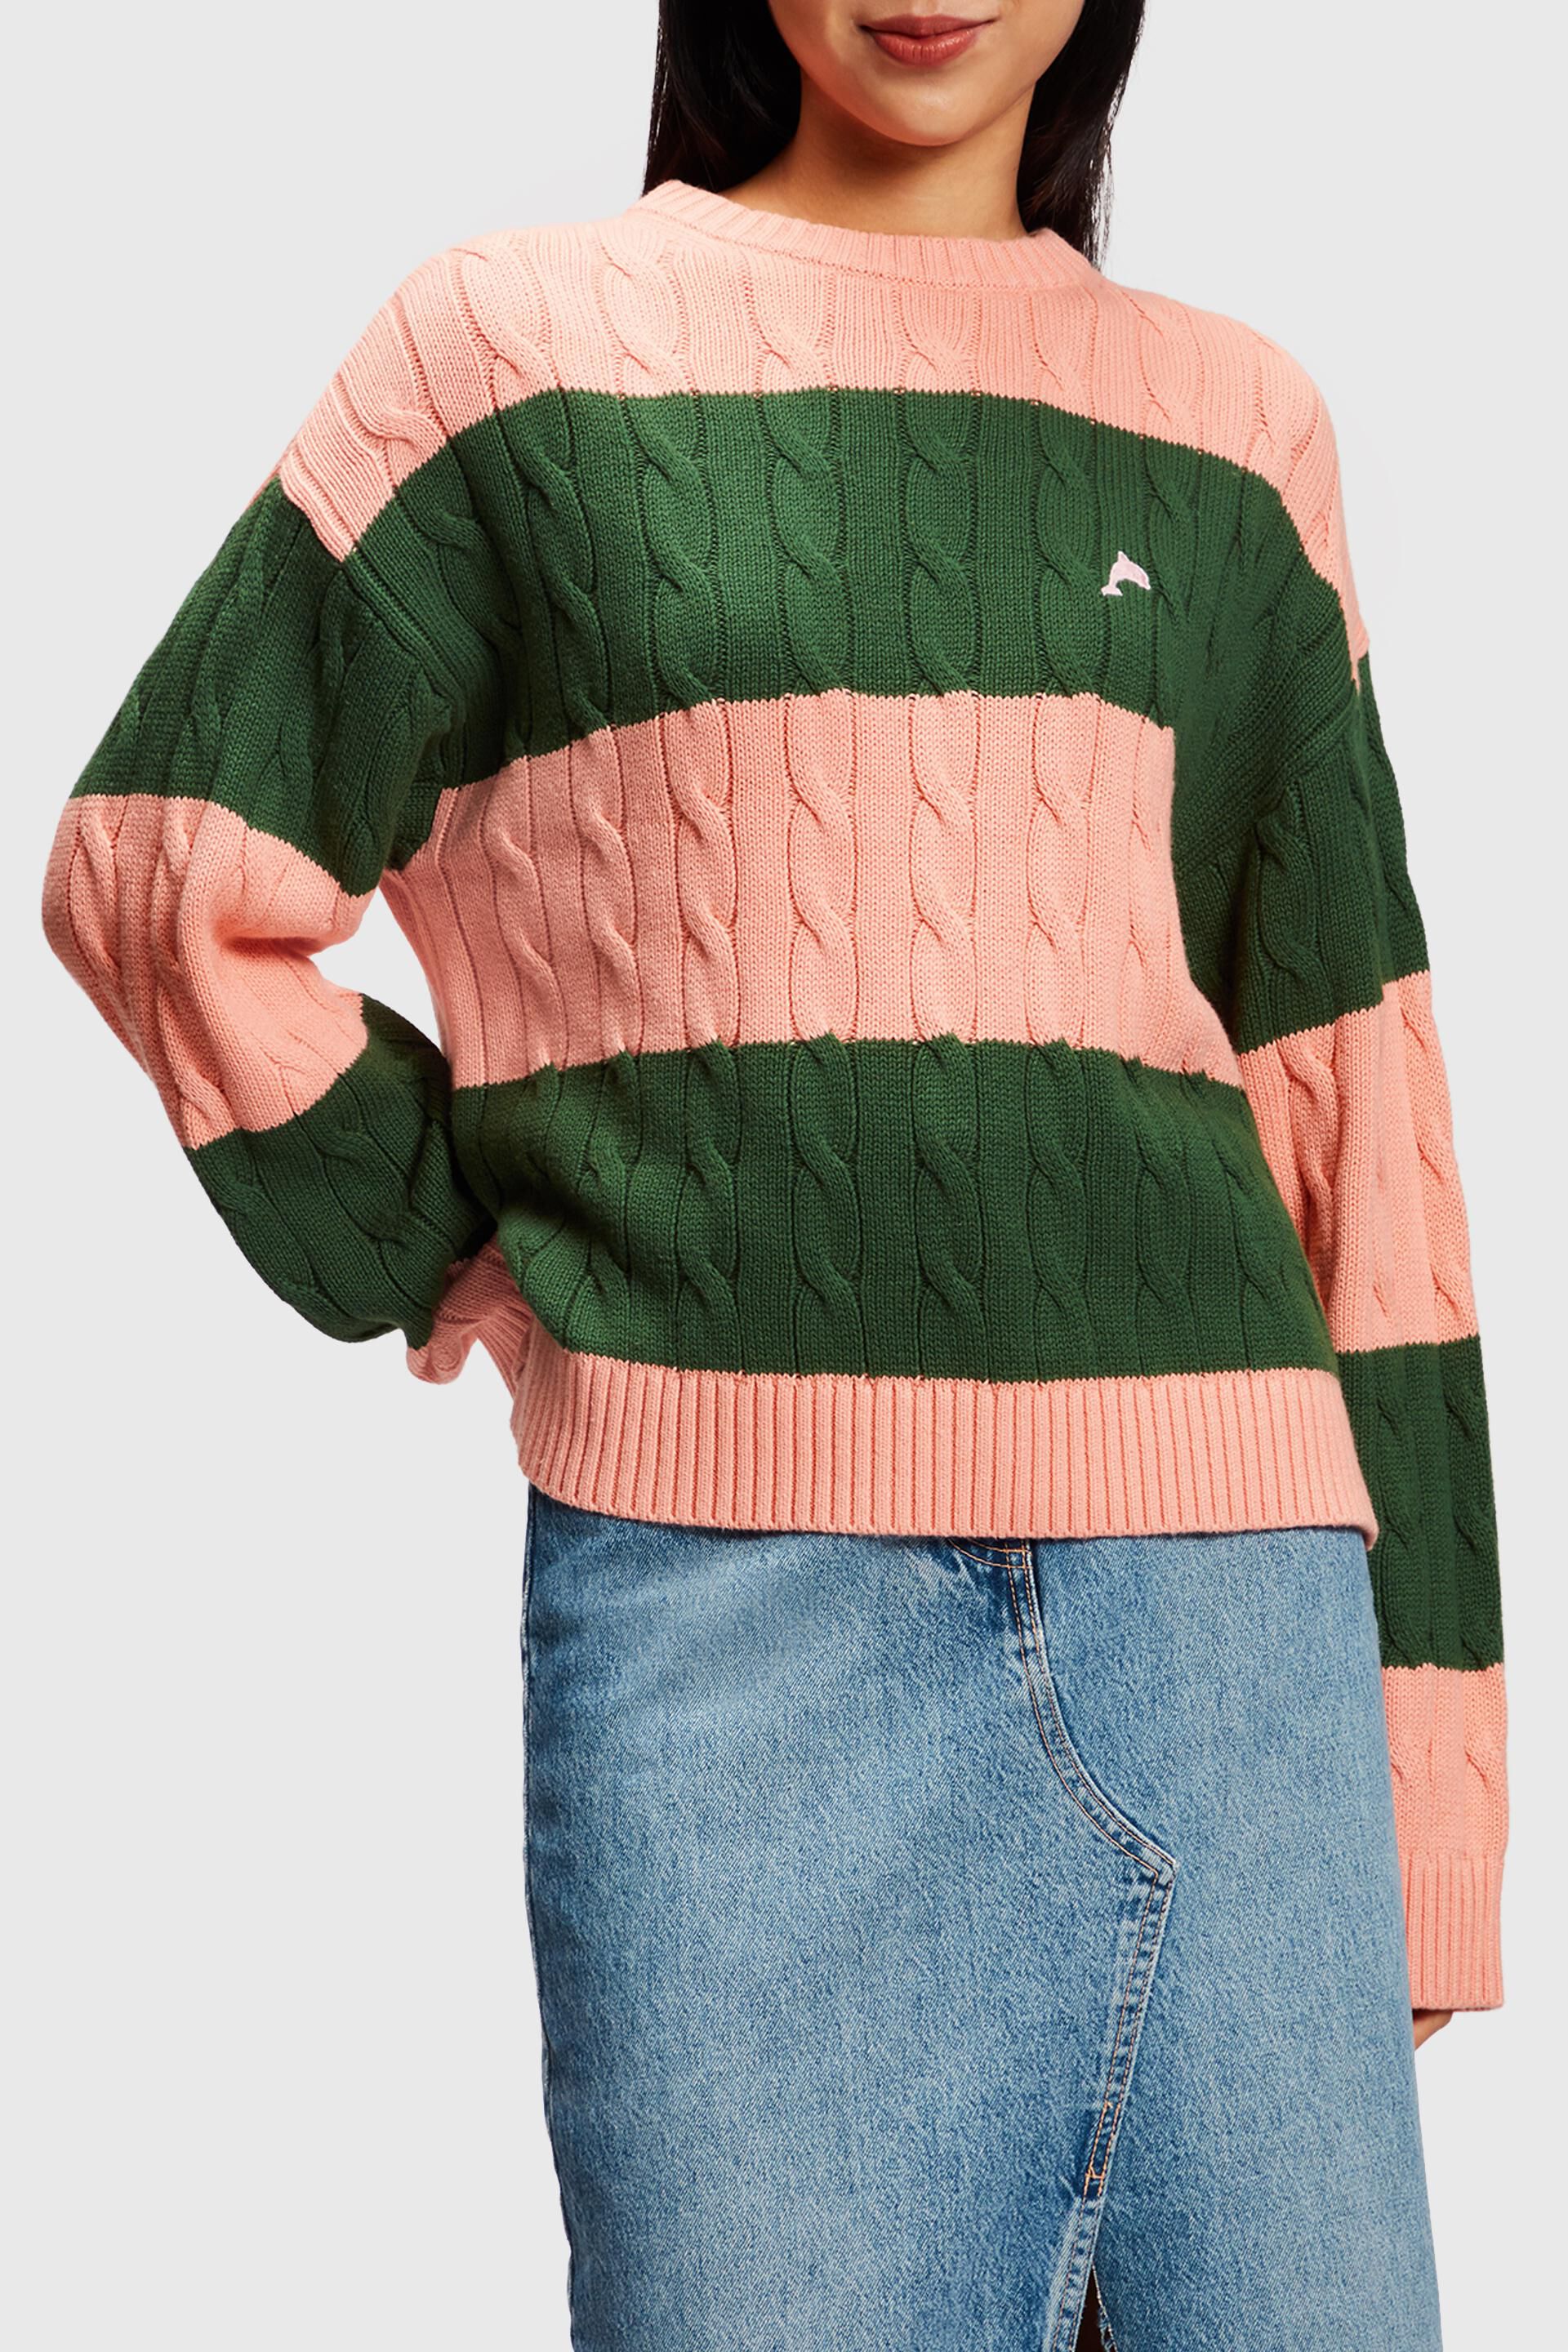 Esprit cable sweater Striped knit